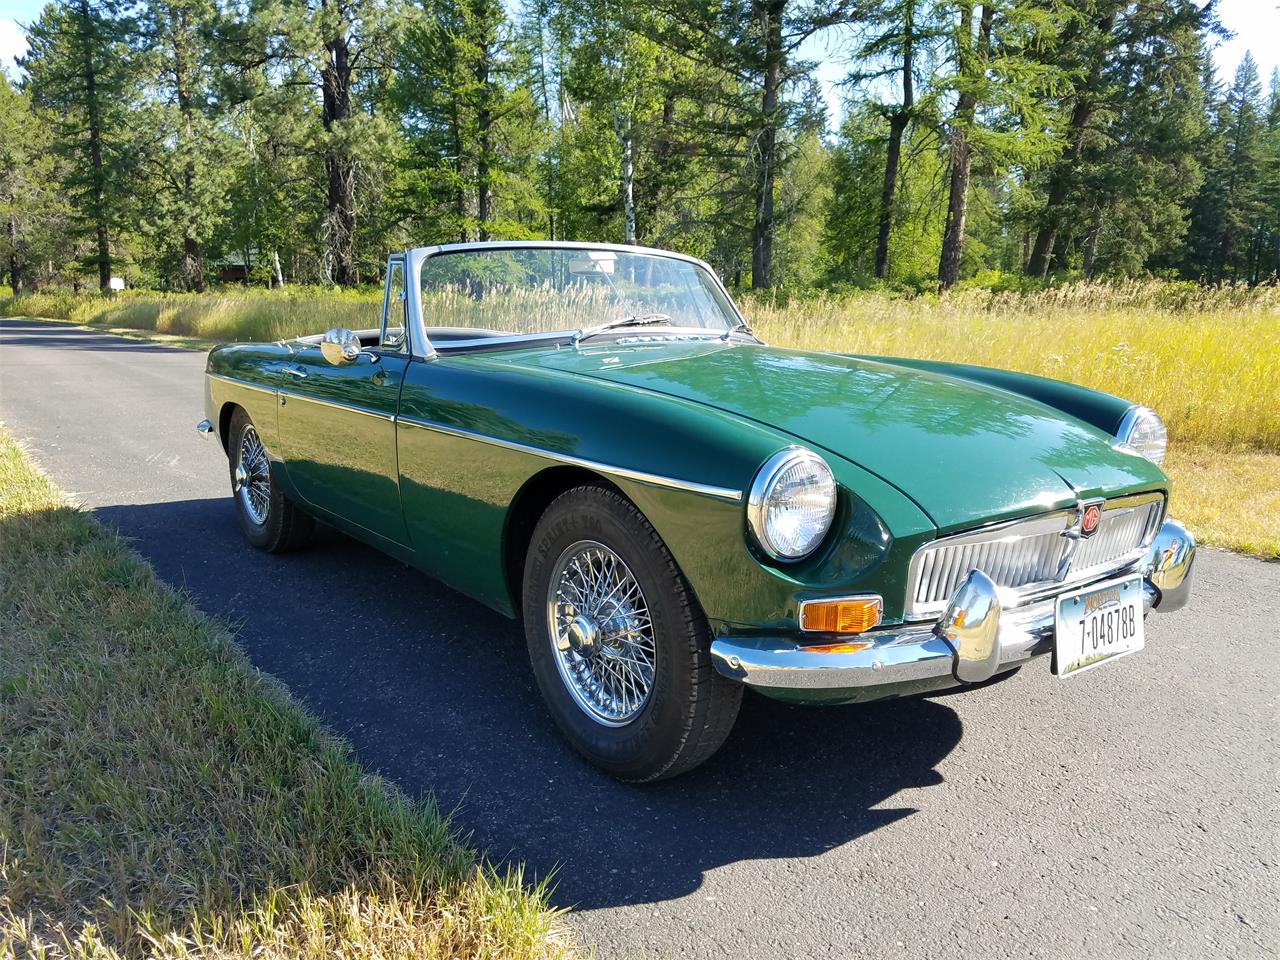 British Racing Green 1967 MG MGB for sale located in Whitefish, Montana - $...